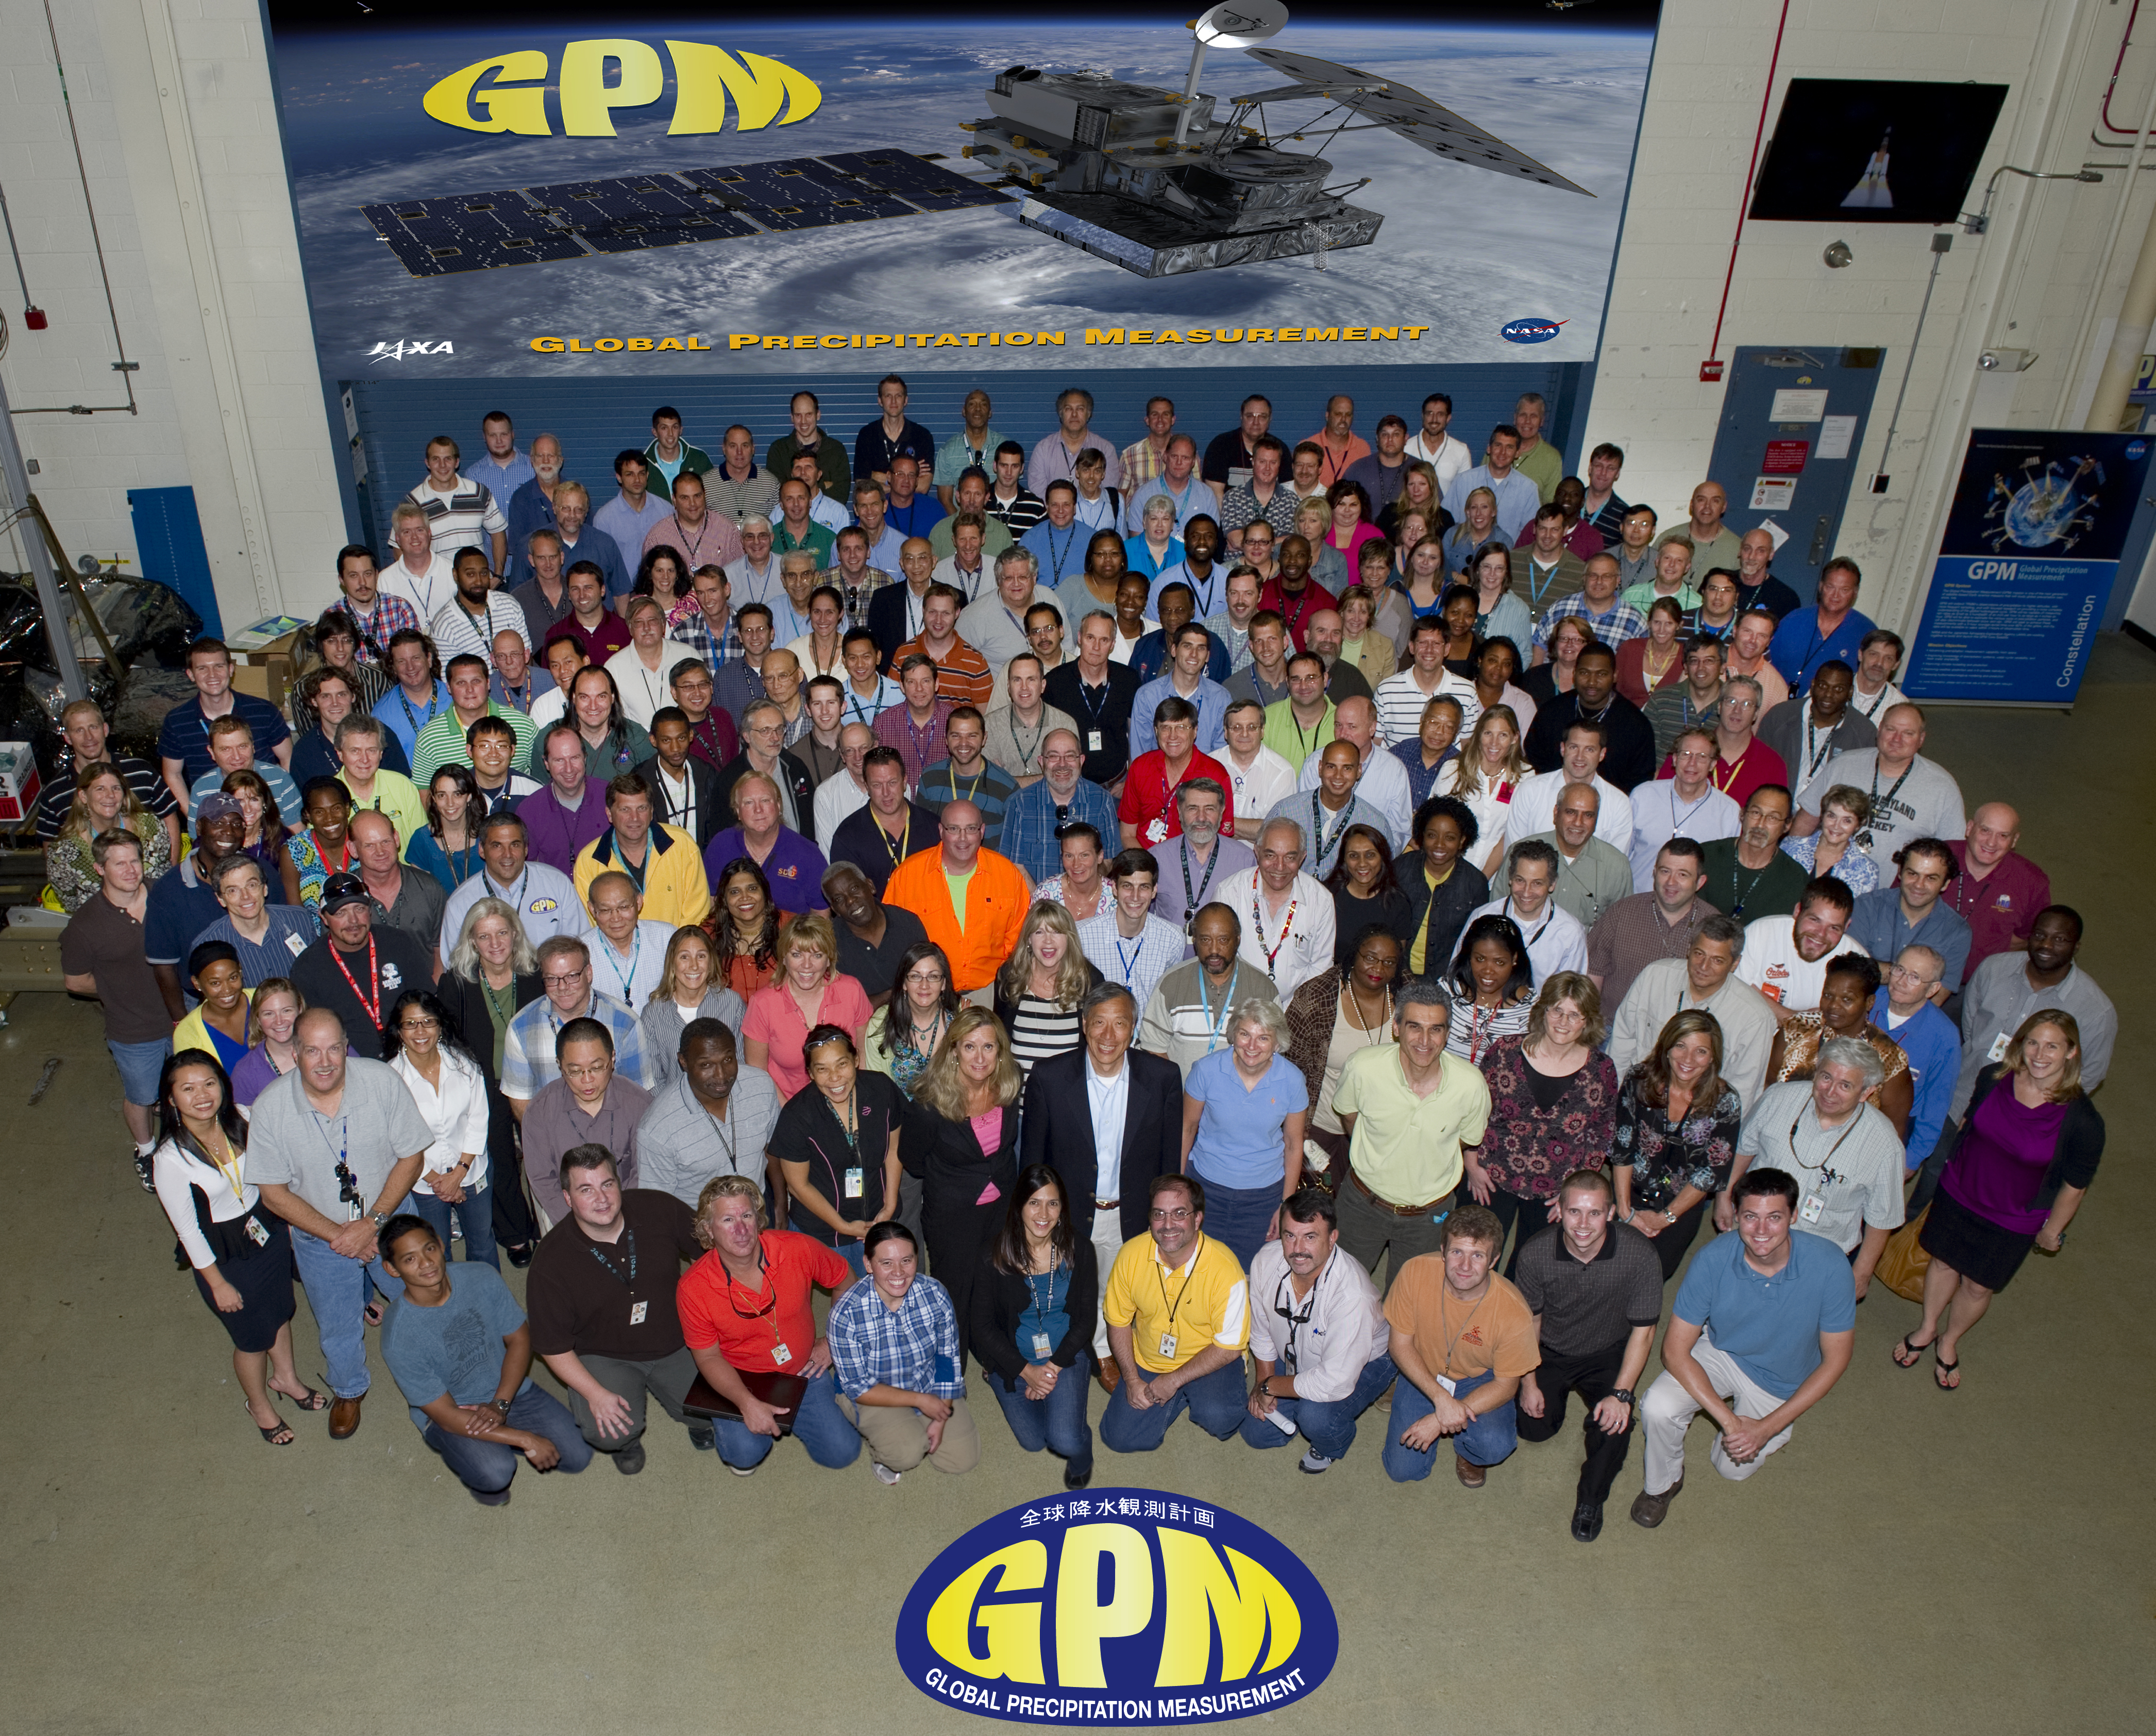 The GPM team